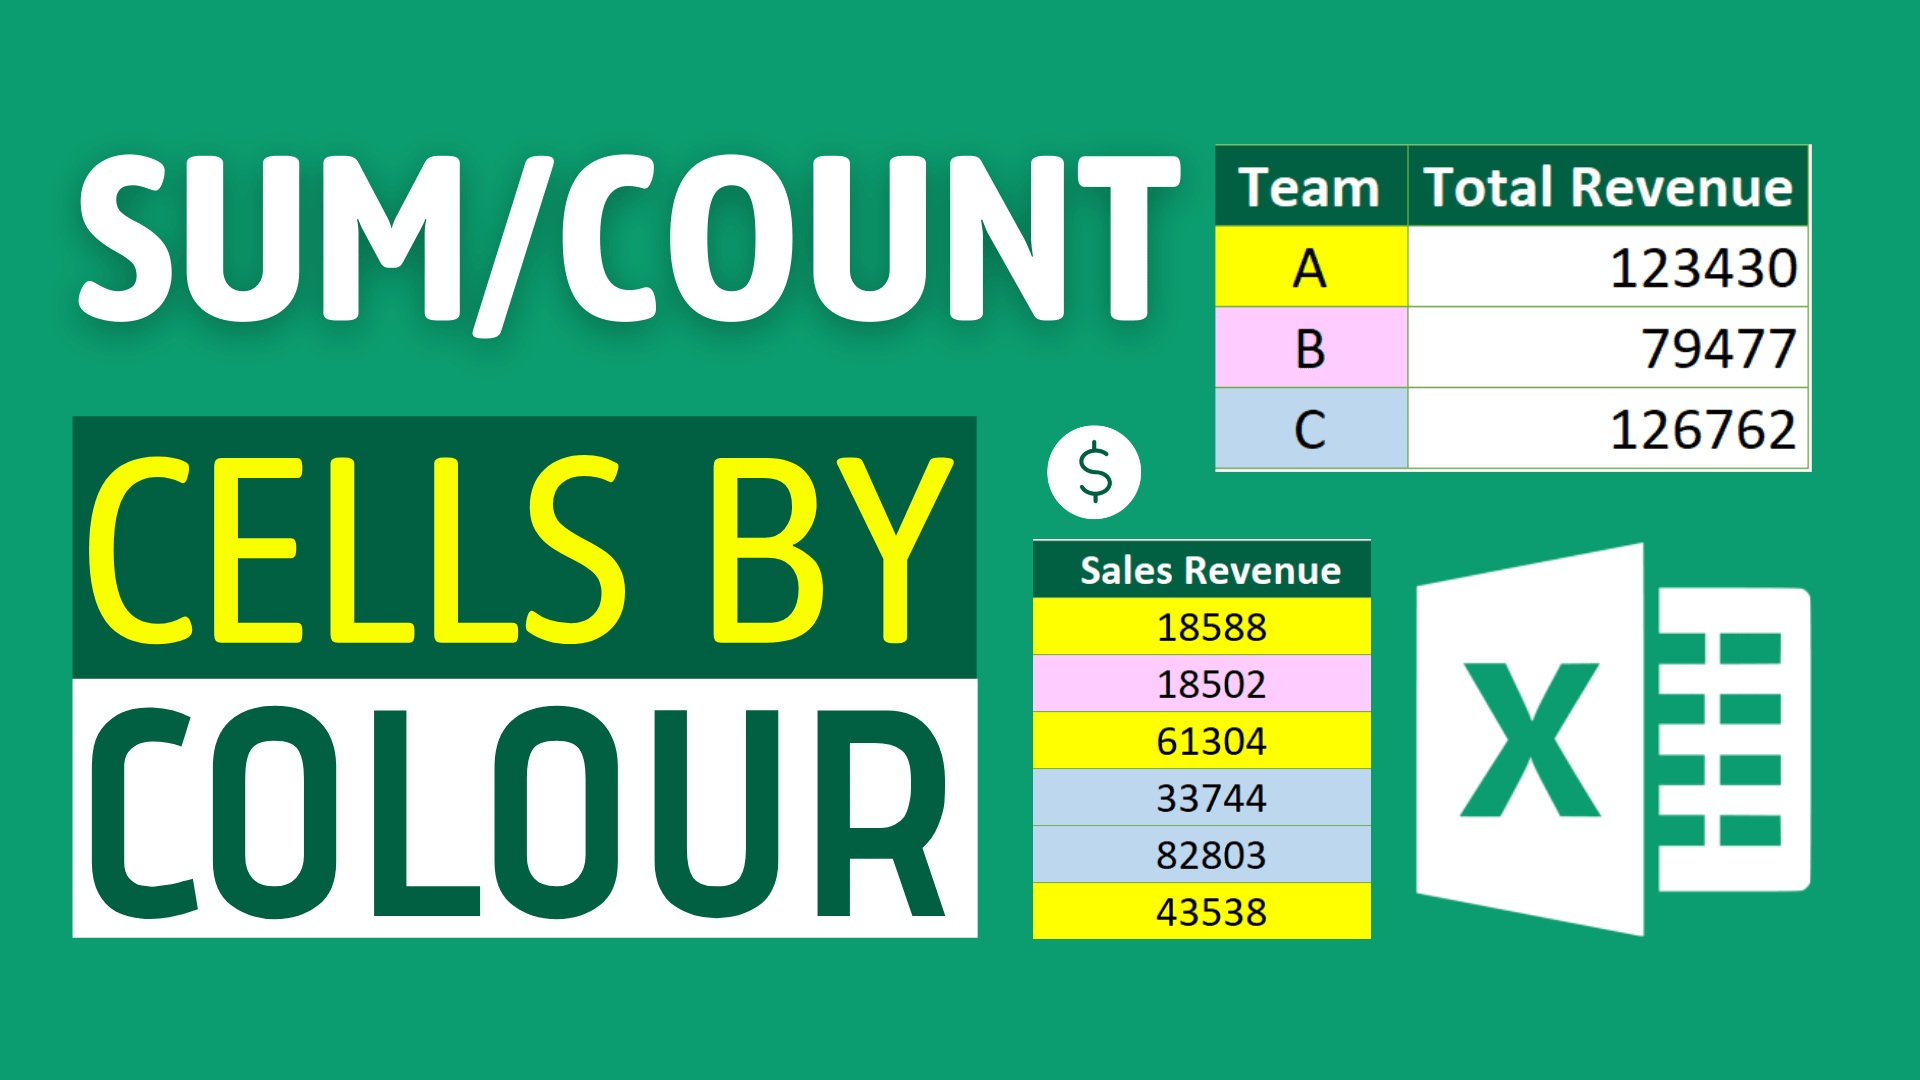 How to Sum and Count Cells by Color in Excel?